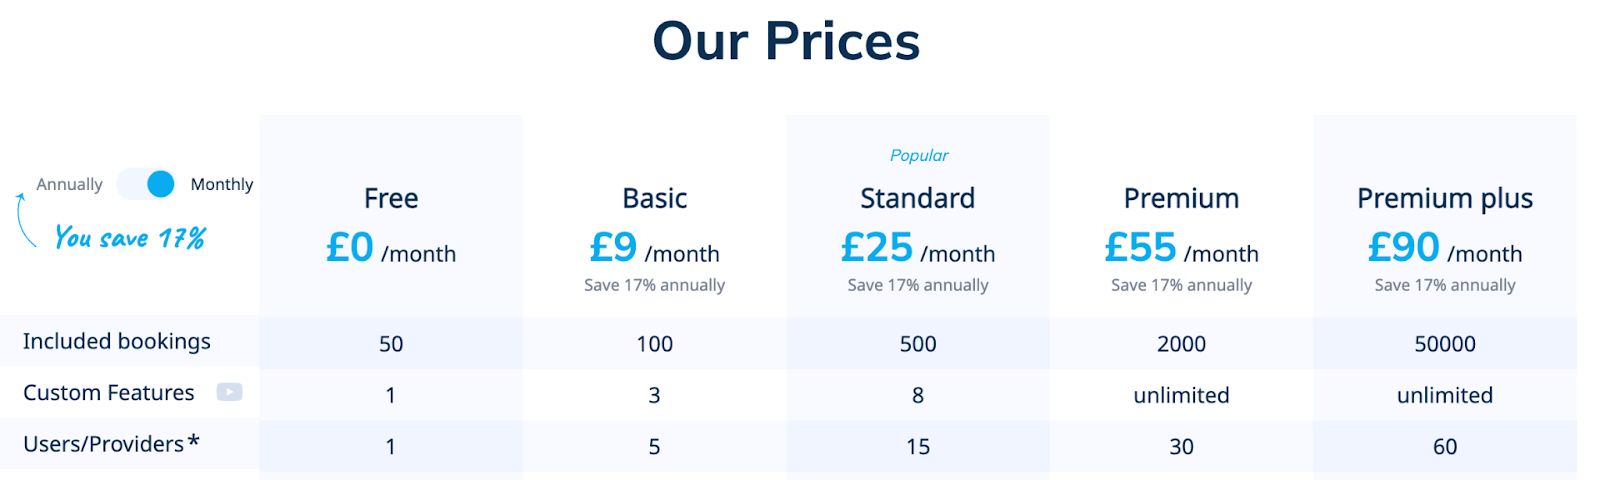 Simplybook.me pricing, from £9 per month